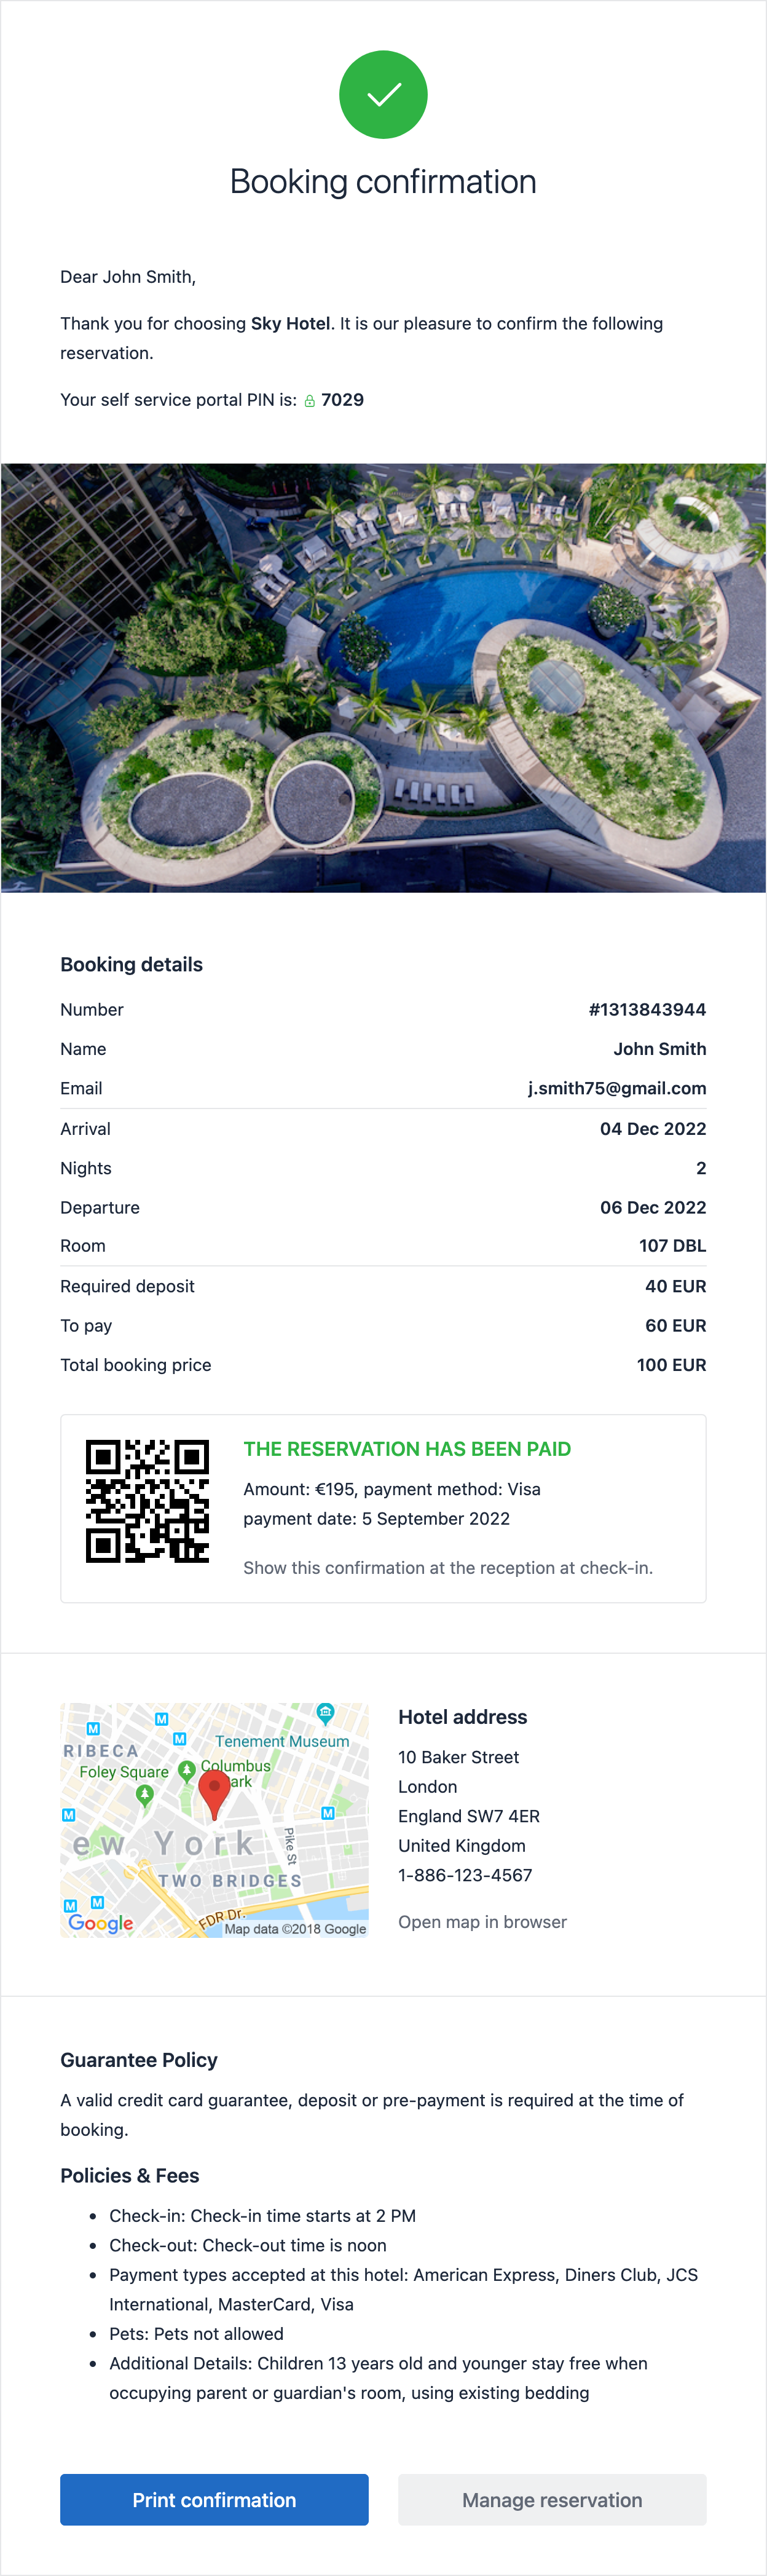 Email template with the booking confirmation